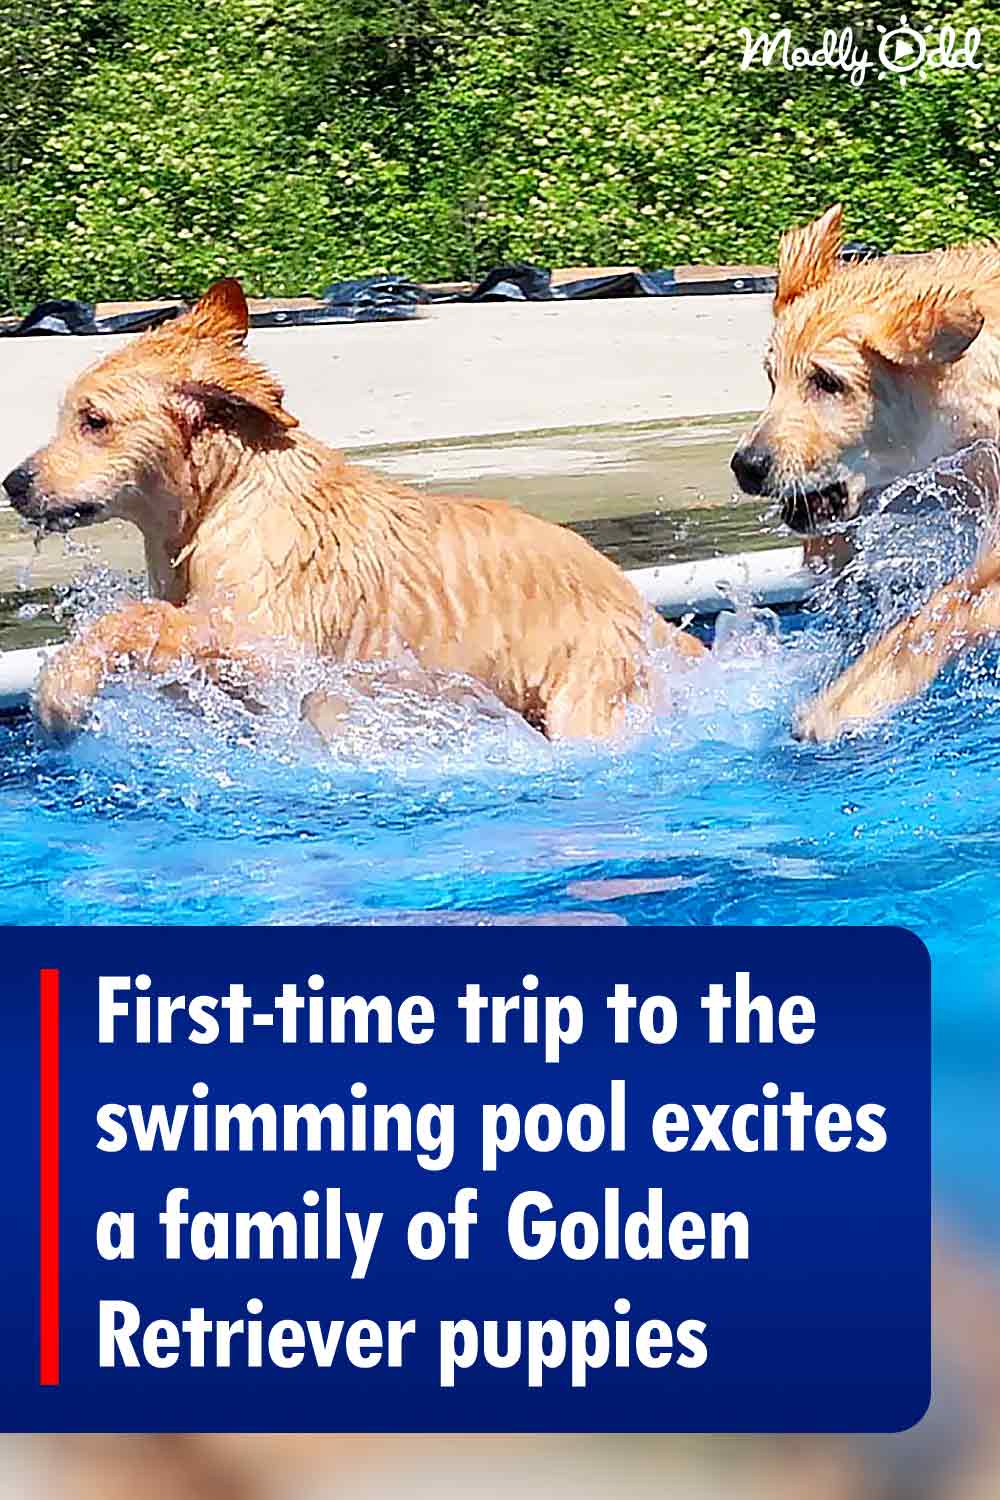 First-time trip to the swimming pool excites a family of Golden Retriever puppies